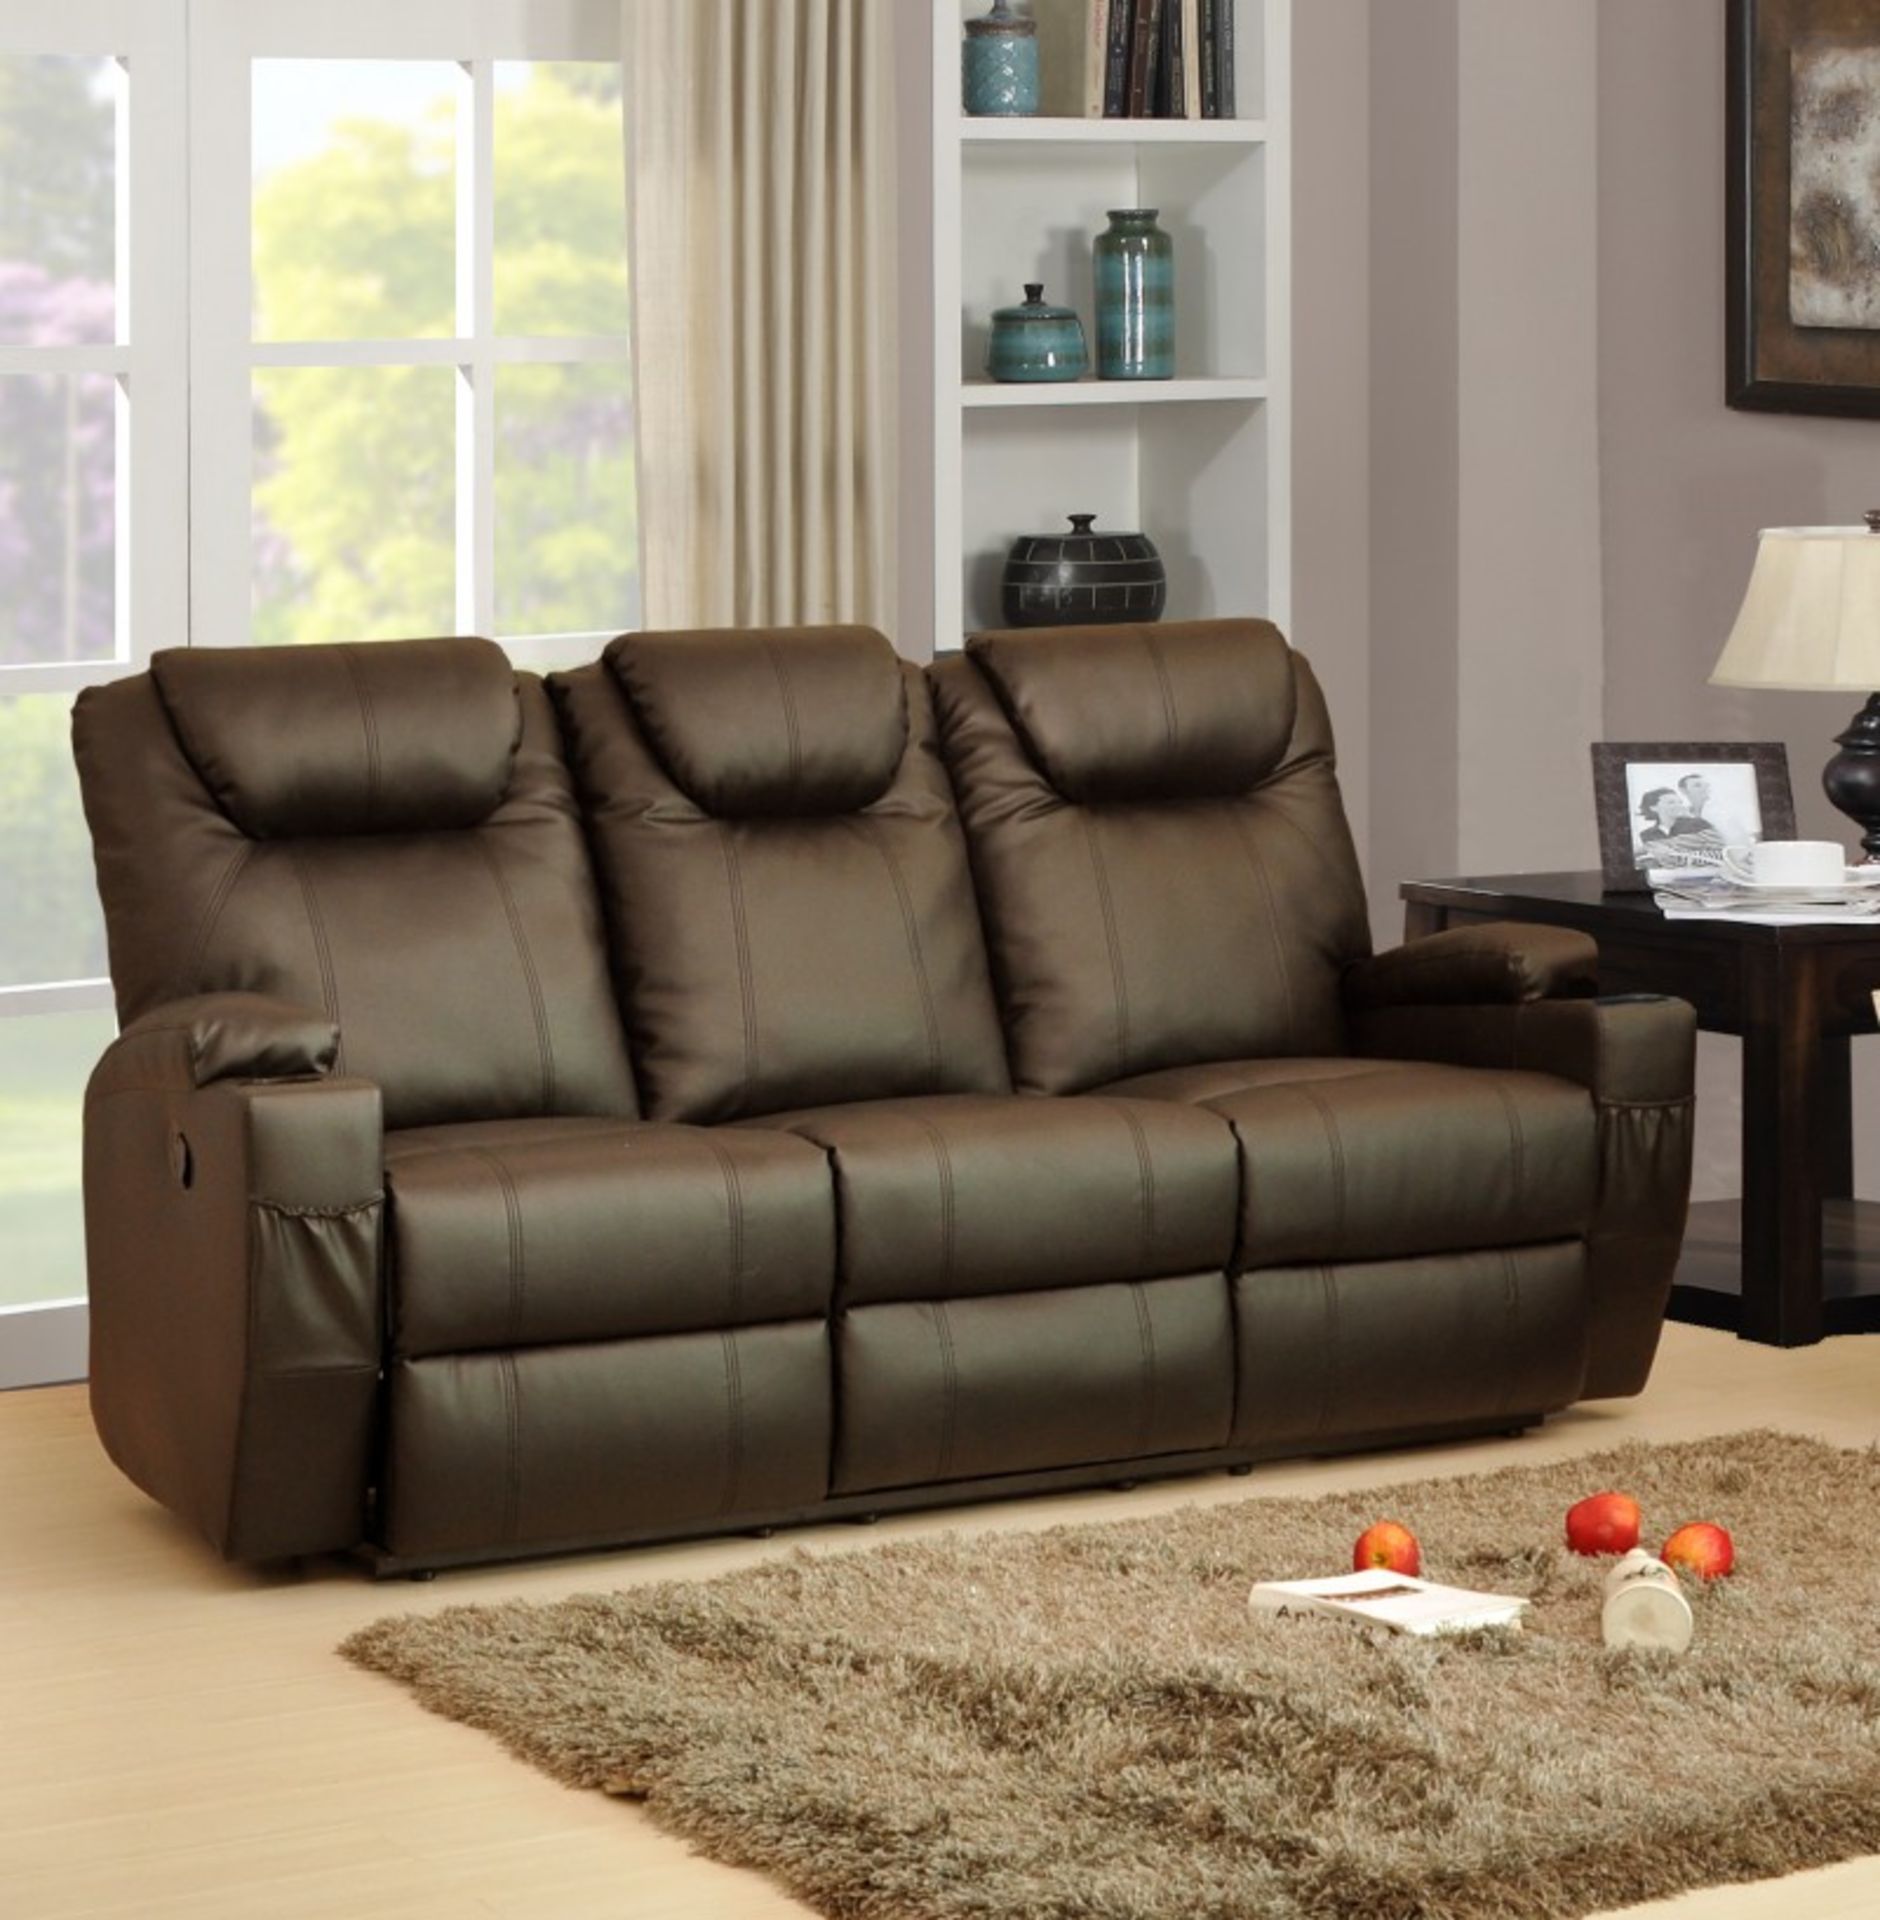 Brand new direct from the manufacturers 3 seater lazy boy reclining sofa in brown